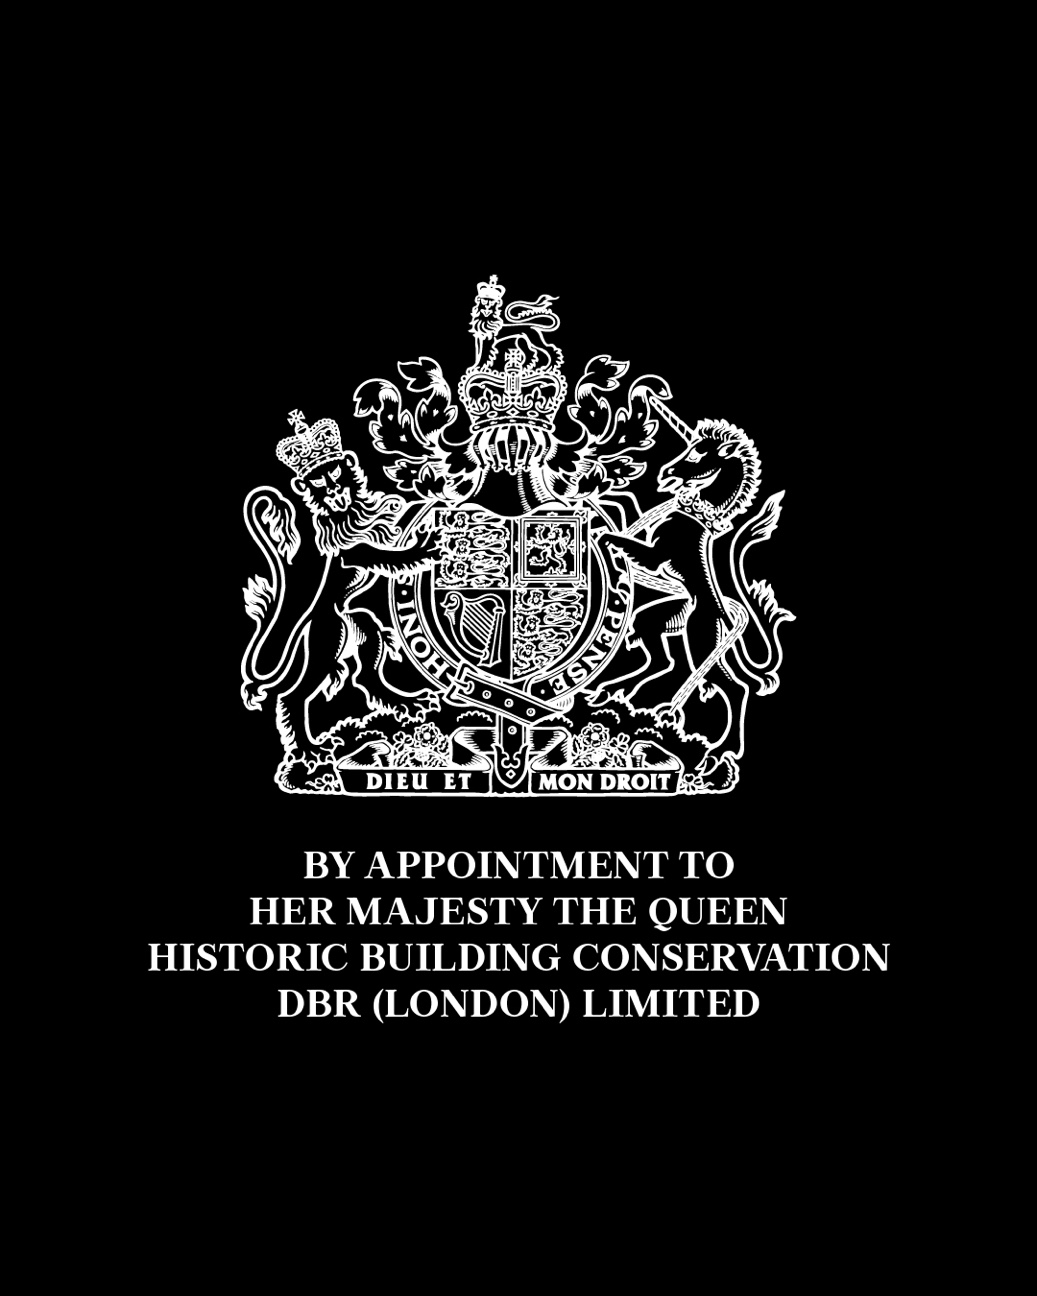 Royal Warrant of Appointment to Her Majesty The Queen granted to